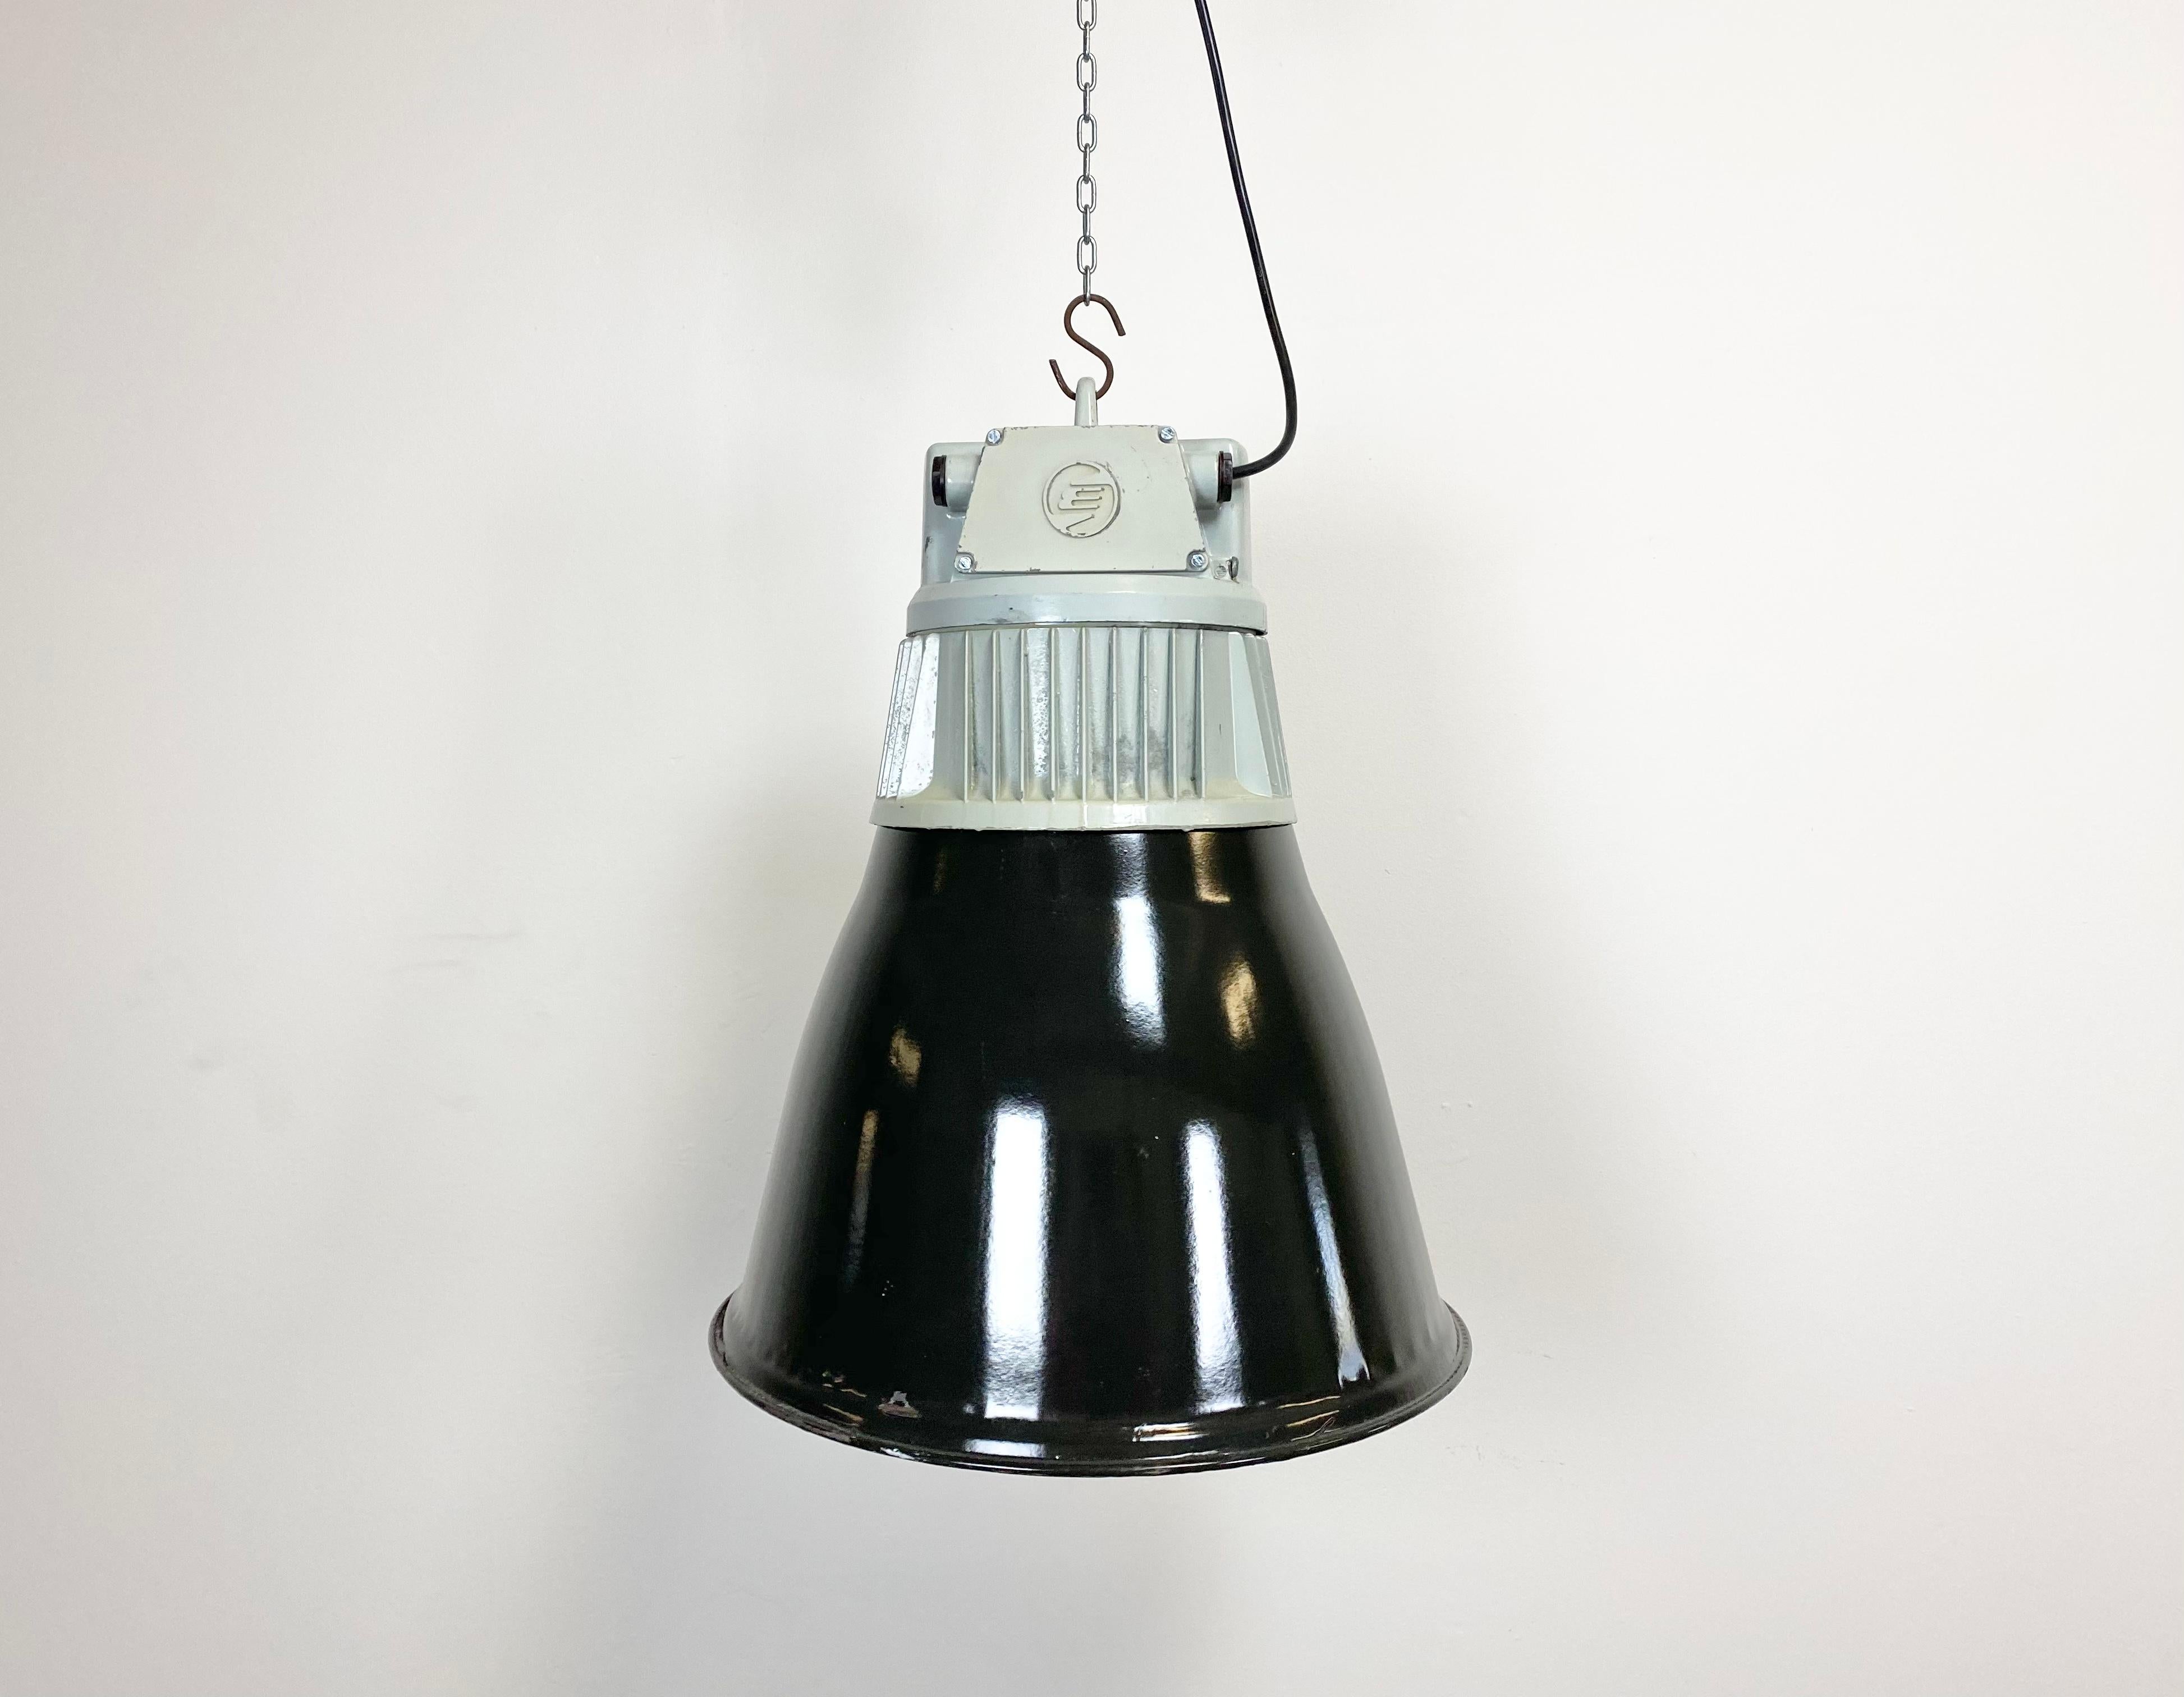 - Industrial hall lamp
- Manufactured by Elektrosvit
- Produced in former Czechoslovakia during the 1960s
- Black enamel shade with white interior
- Grey cast aluminium top
- Weight: 6 kg
- New porcelain socket for E 27 lightbulbs and wire
-